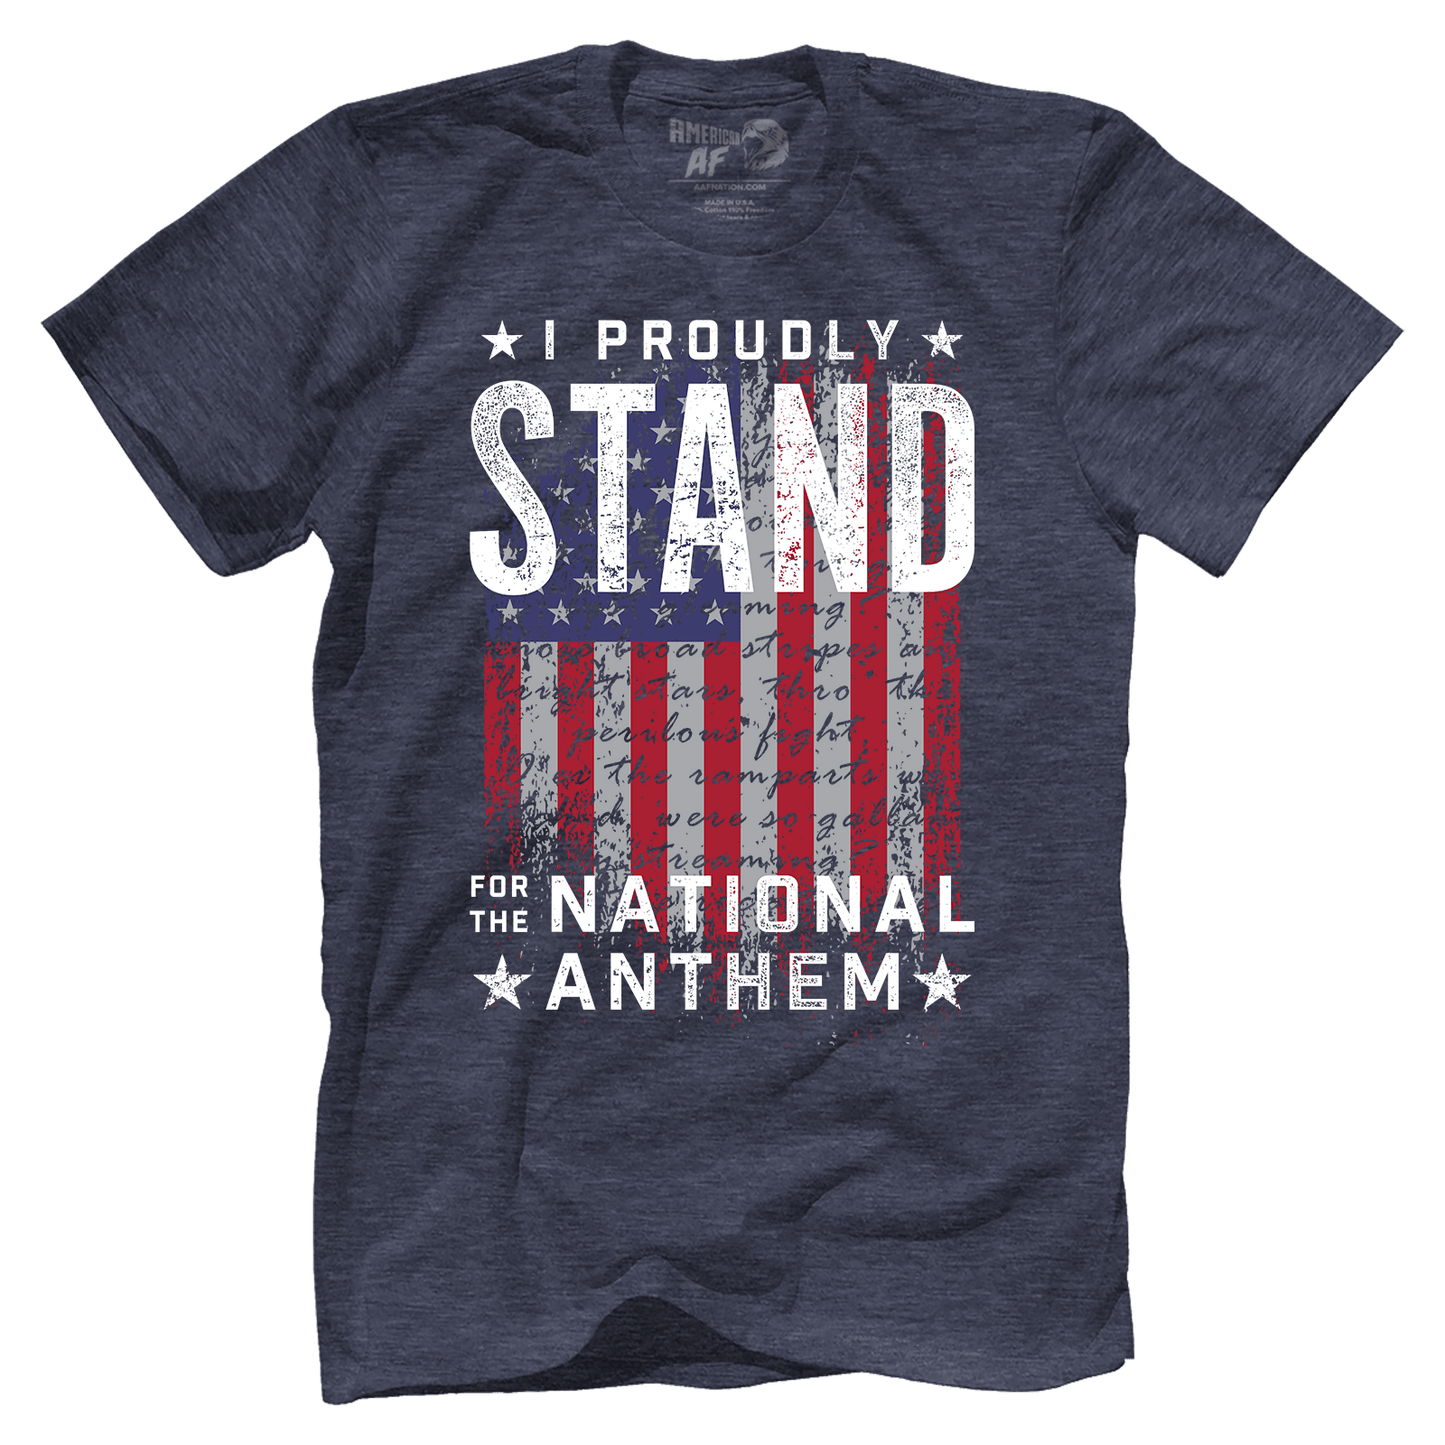 T-shirt Premium Mens Triblend Shirt / Vintage Navy / S I Stand for the Anthem